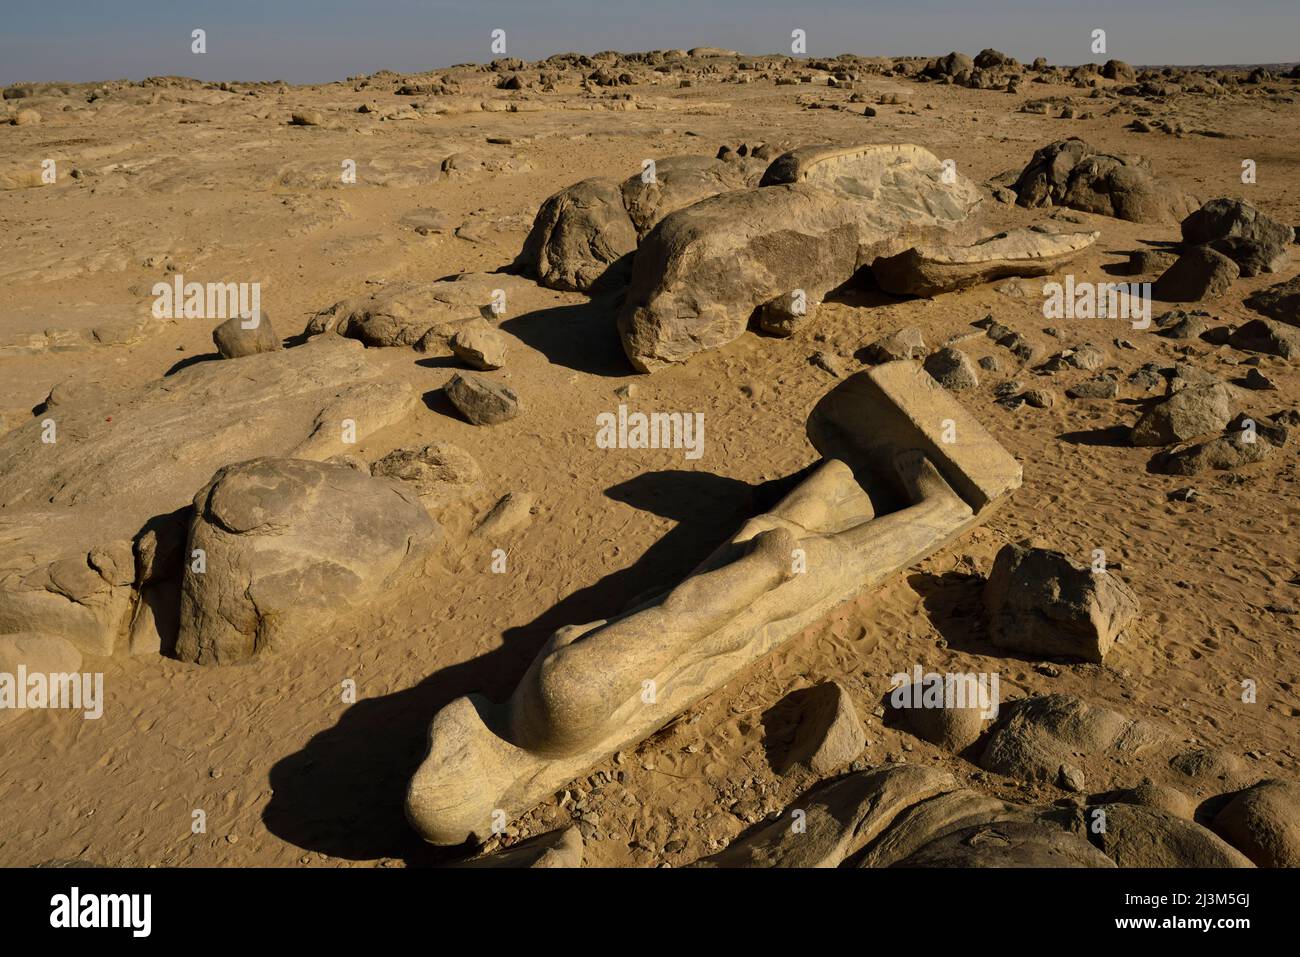 At Tumbus, a broken statue of king Taharqa from the Kustite period lies by the main road that follows the east bank of the Nile.; Kerma, Sudan, Egypt. Stock Photo